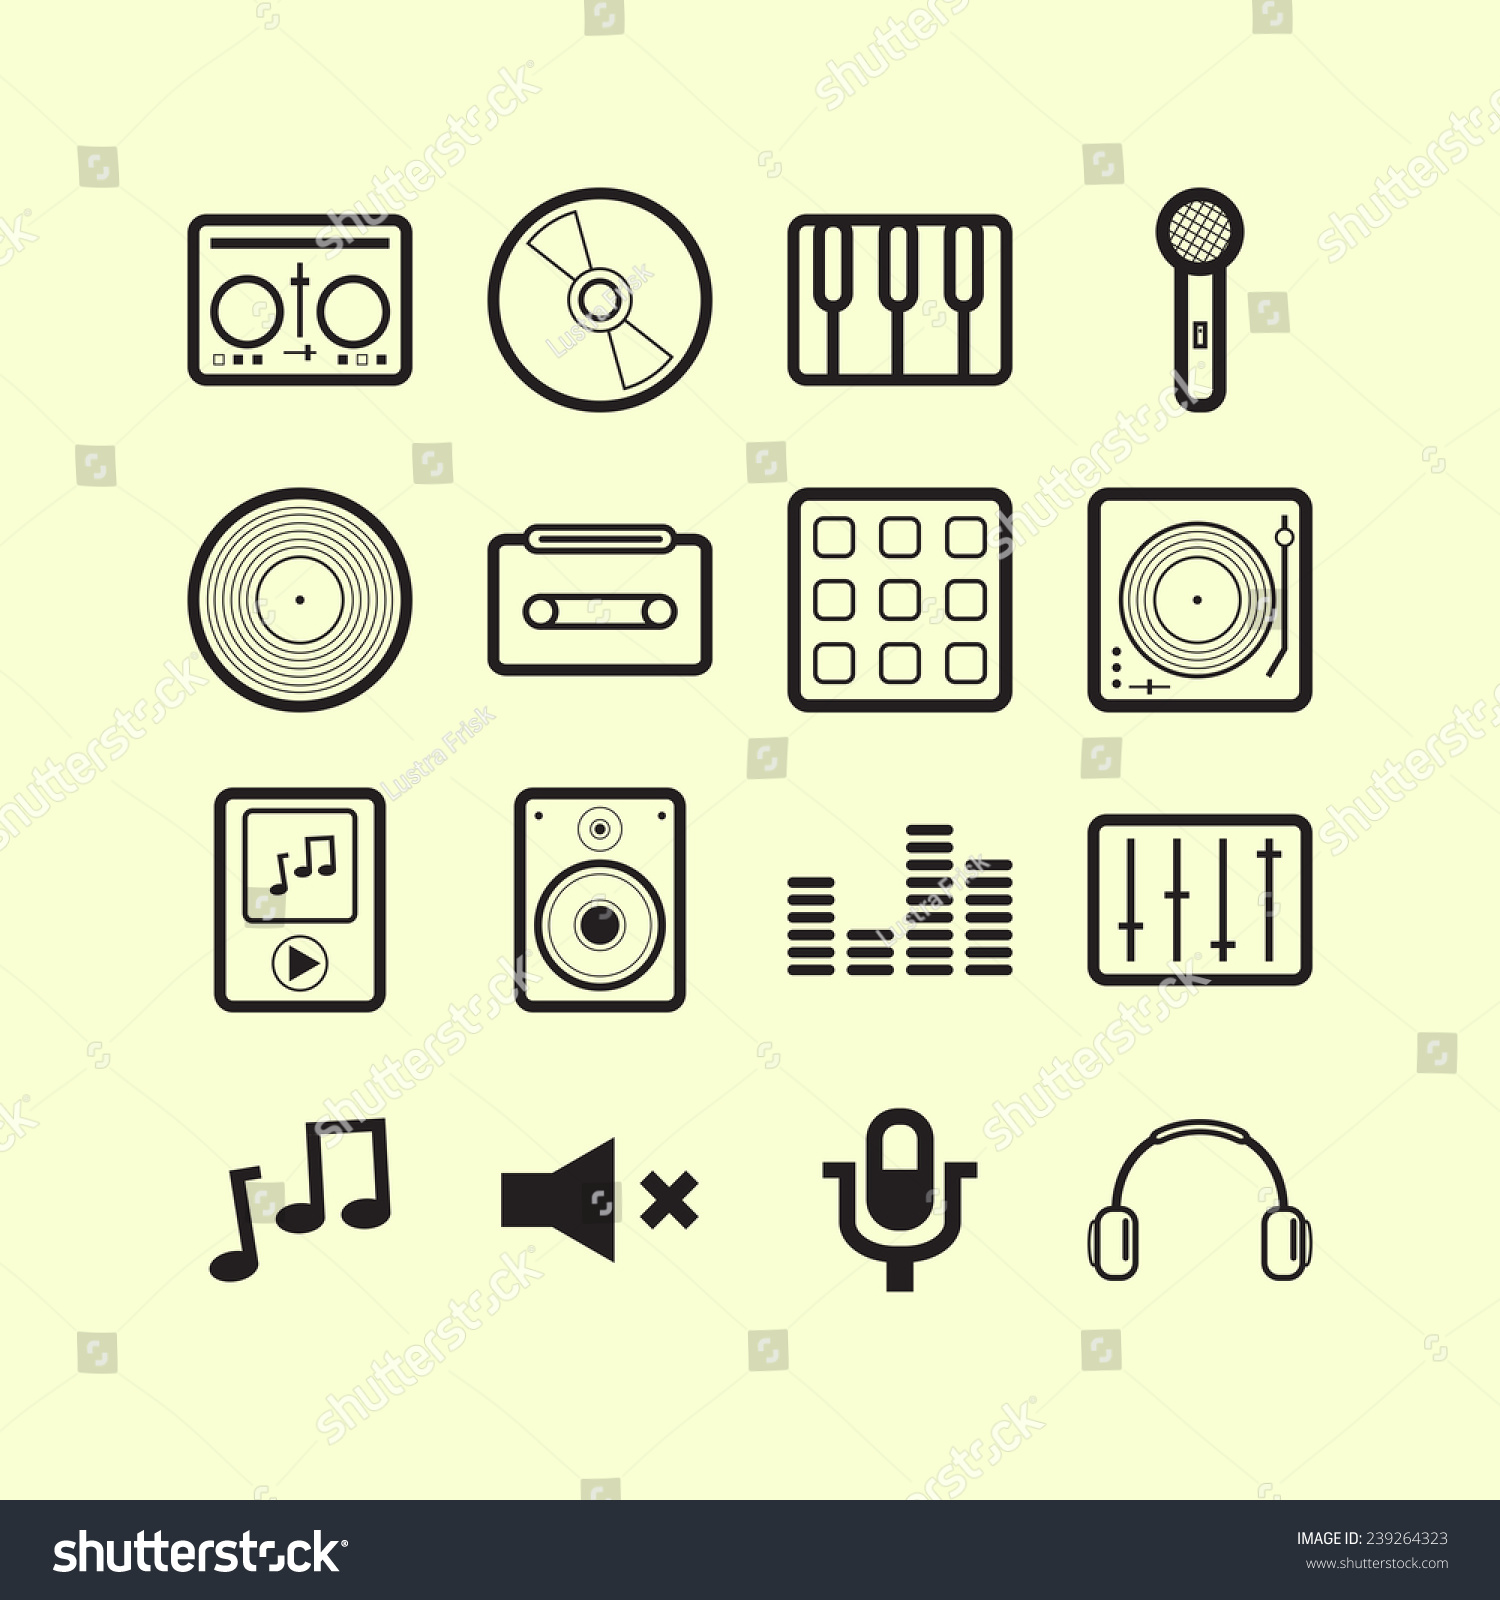 Set of simple musical icons - Royalty Free Stock Vector 239264323 ...